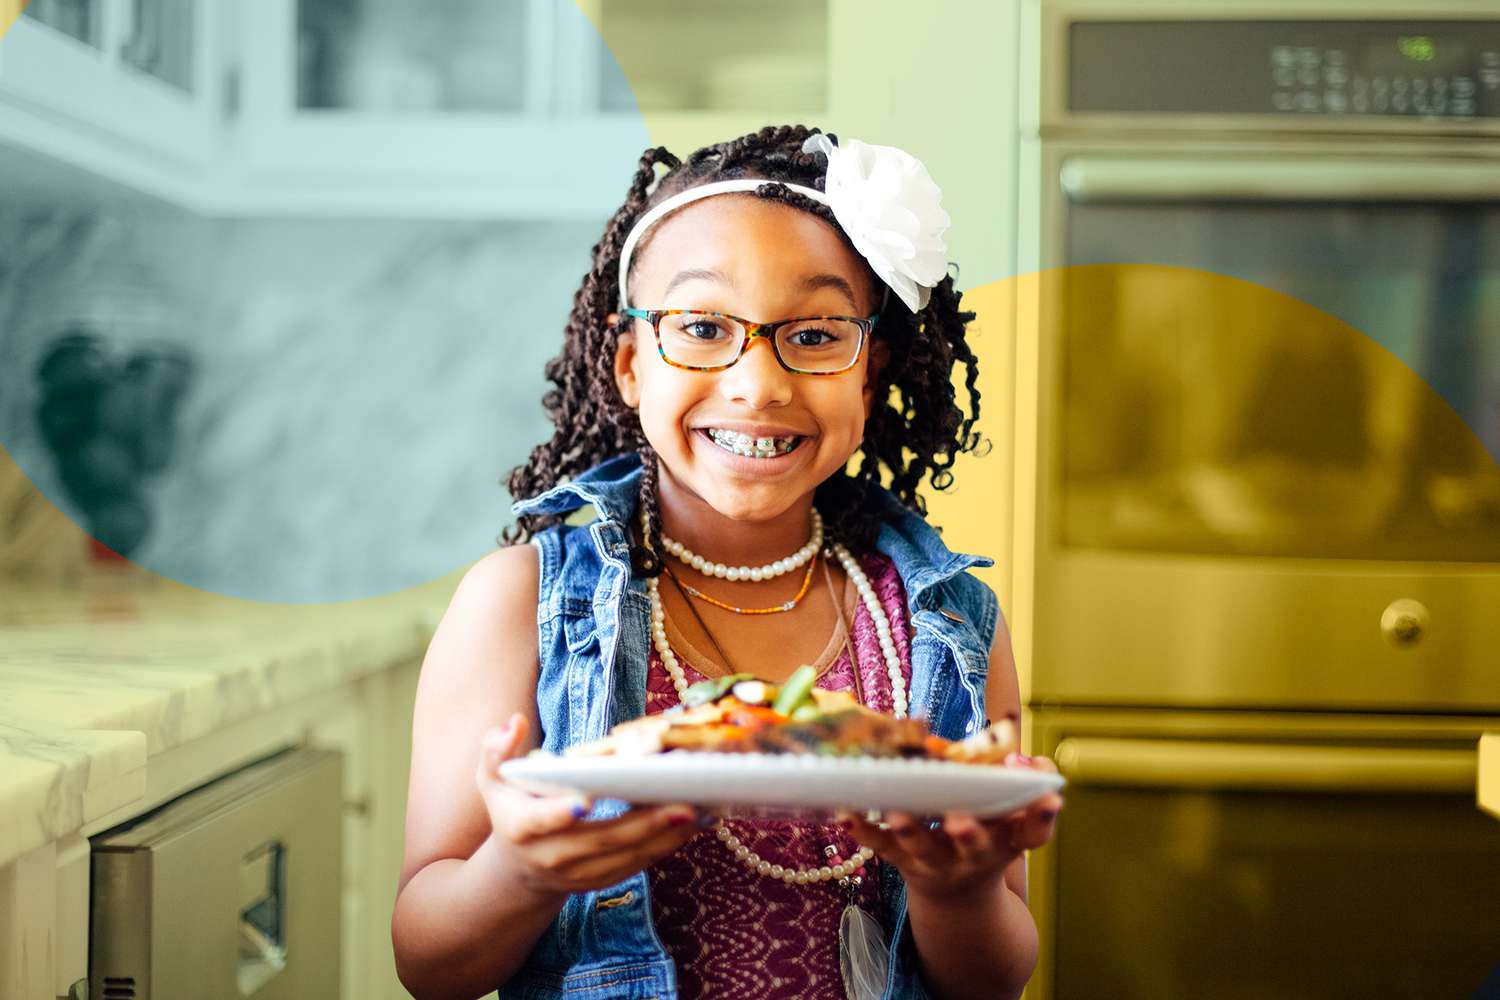 Portrait of cheerful girl with food plate in kitchen